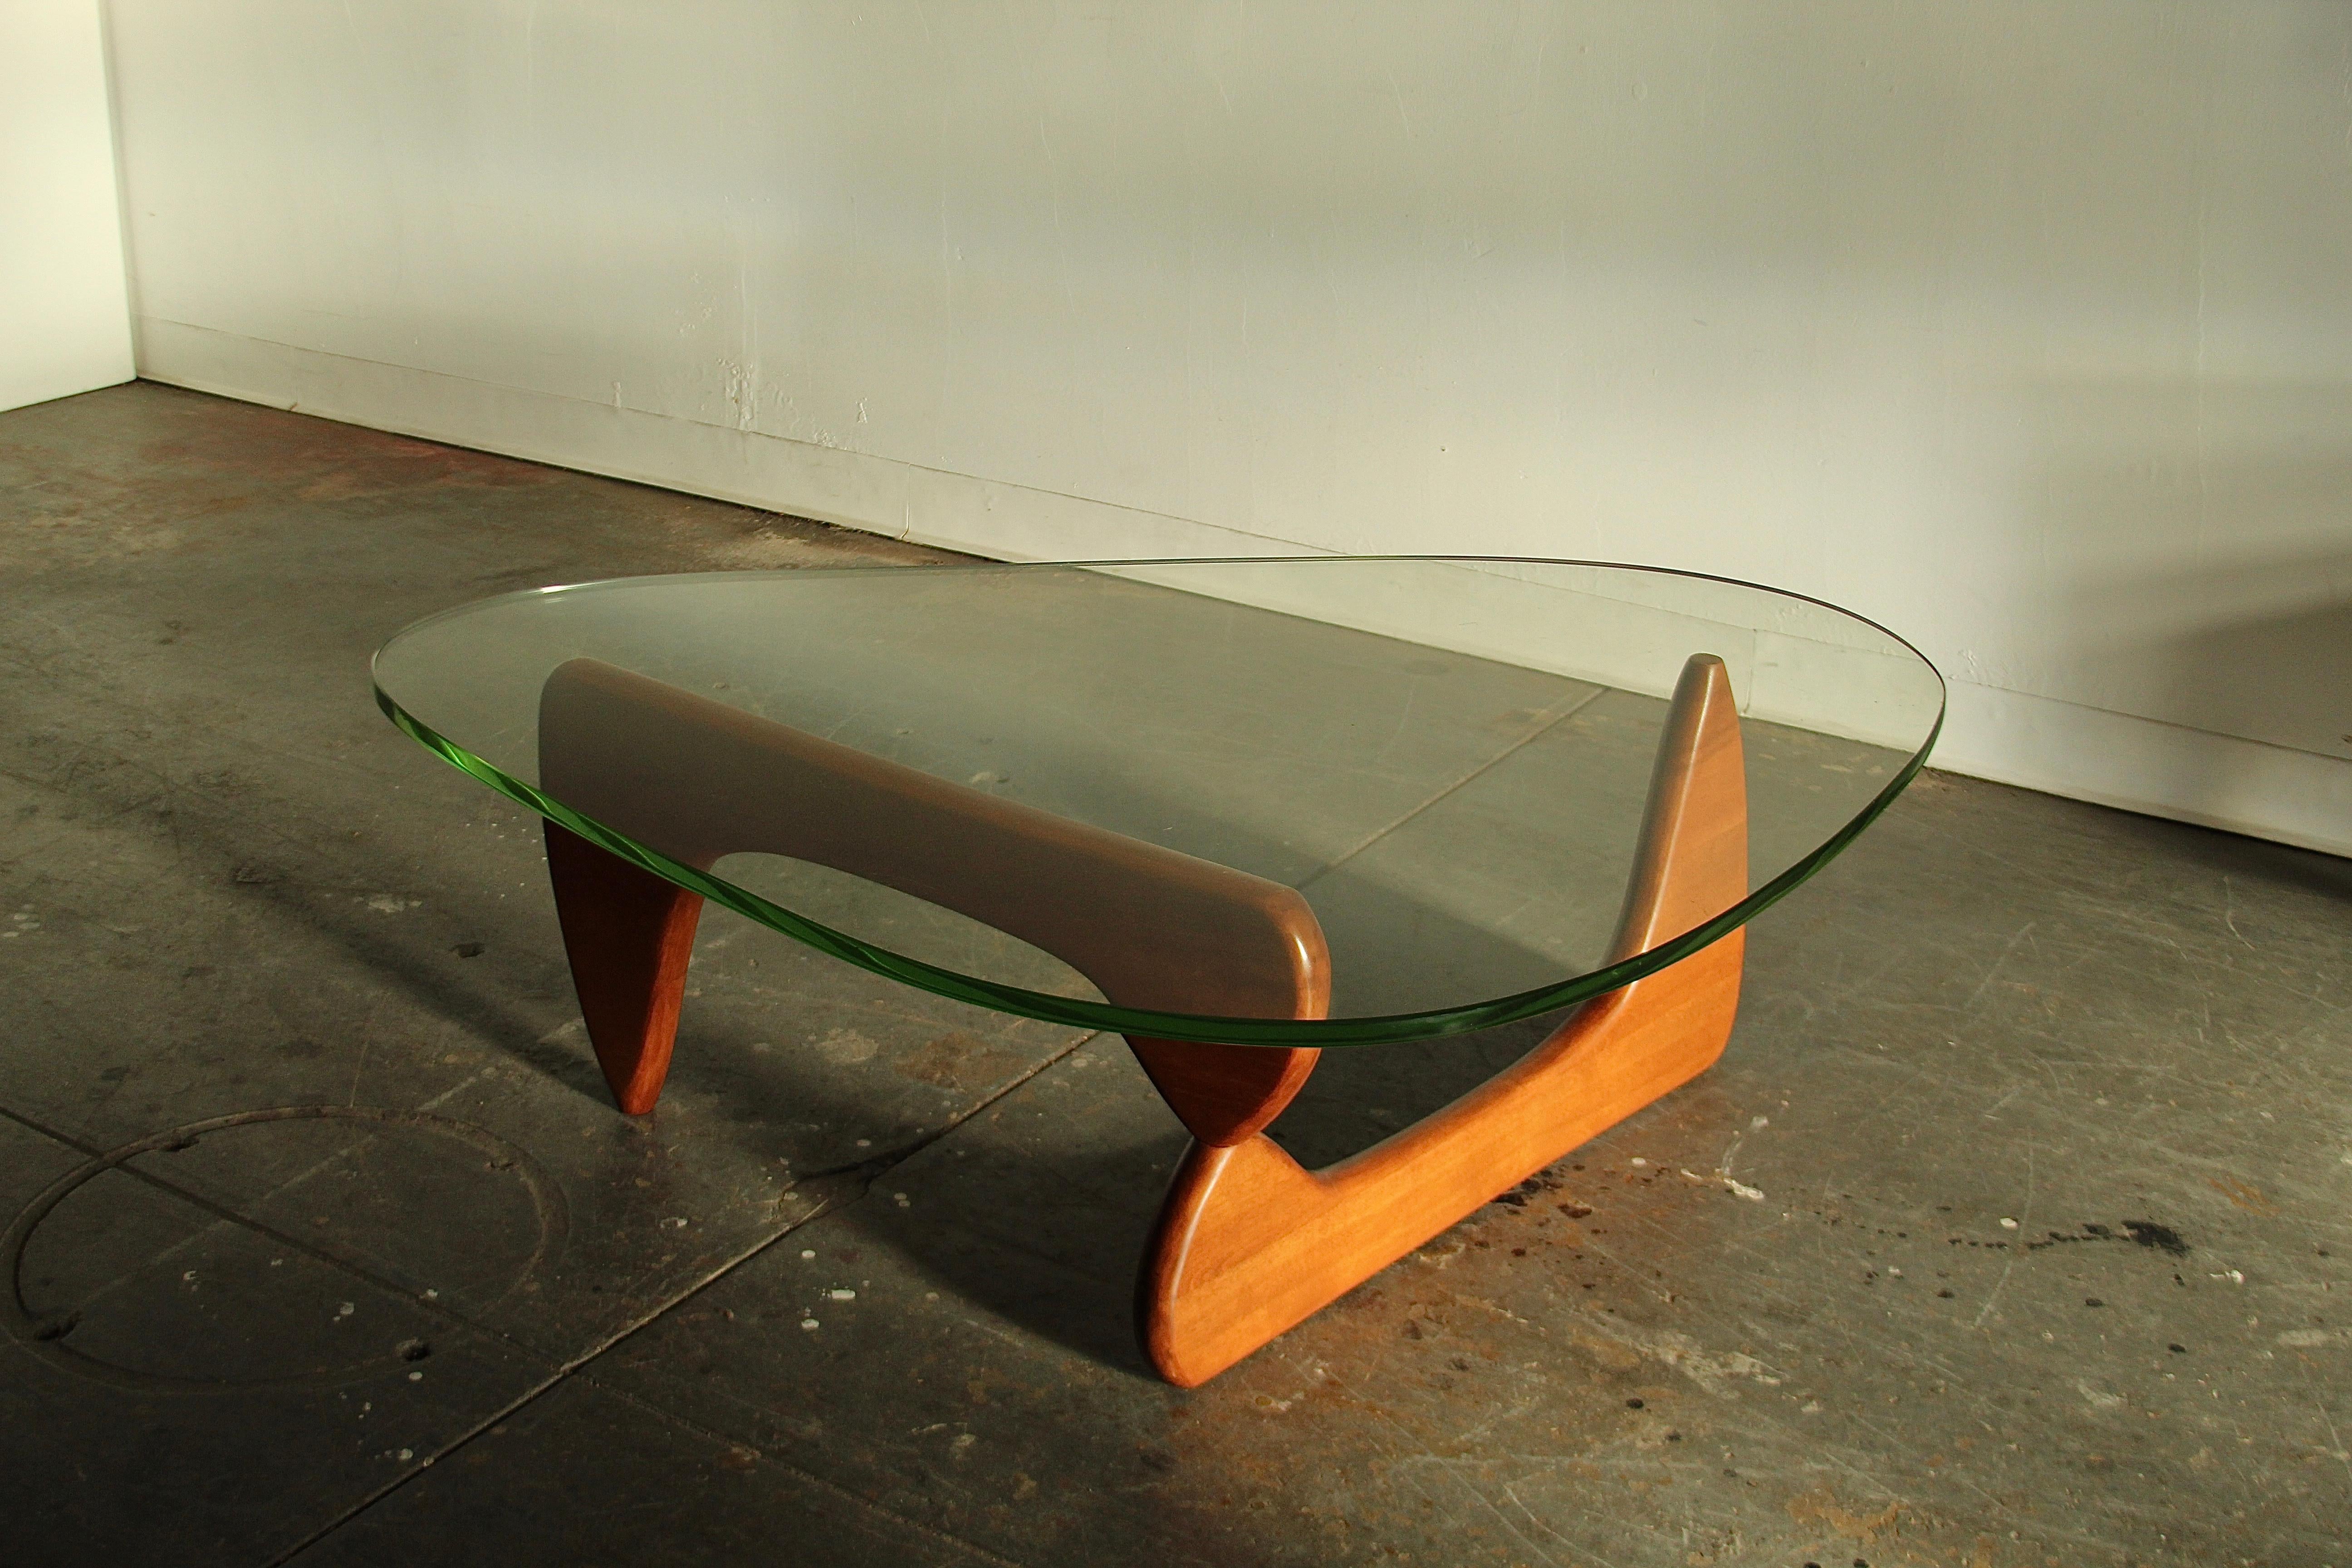 A stunning and completely original Isamu Noguchi's IN-50 coffee table circa ~1949. This example consists of an early cherry wood base and the original apple green glass. The cherry base has been gently refinished and waxed and is in phenomenal